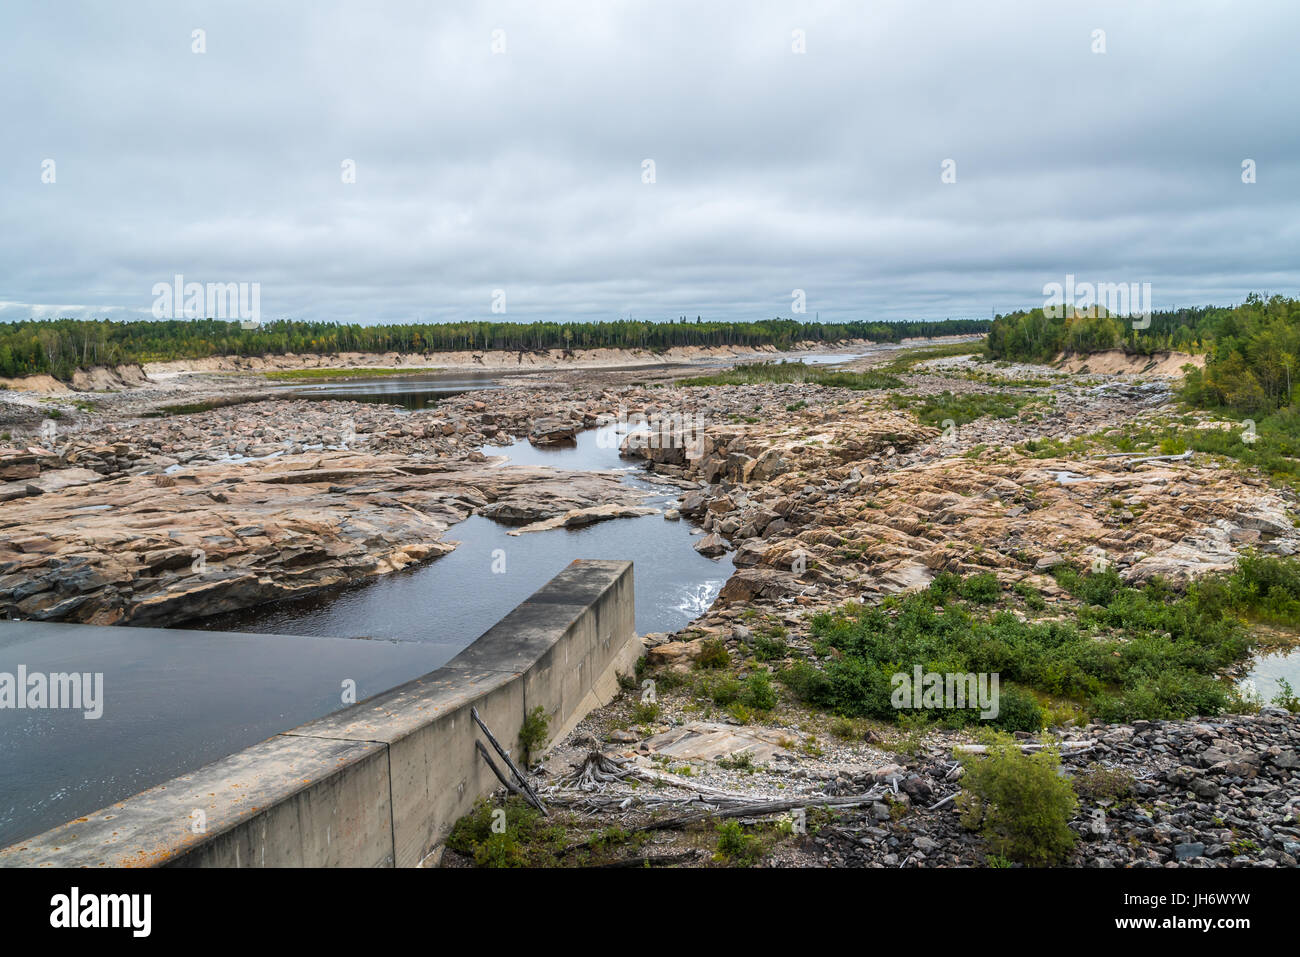 Construction of generating stations along the Lower Mattagami River Stock Photo